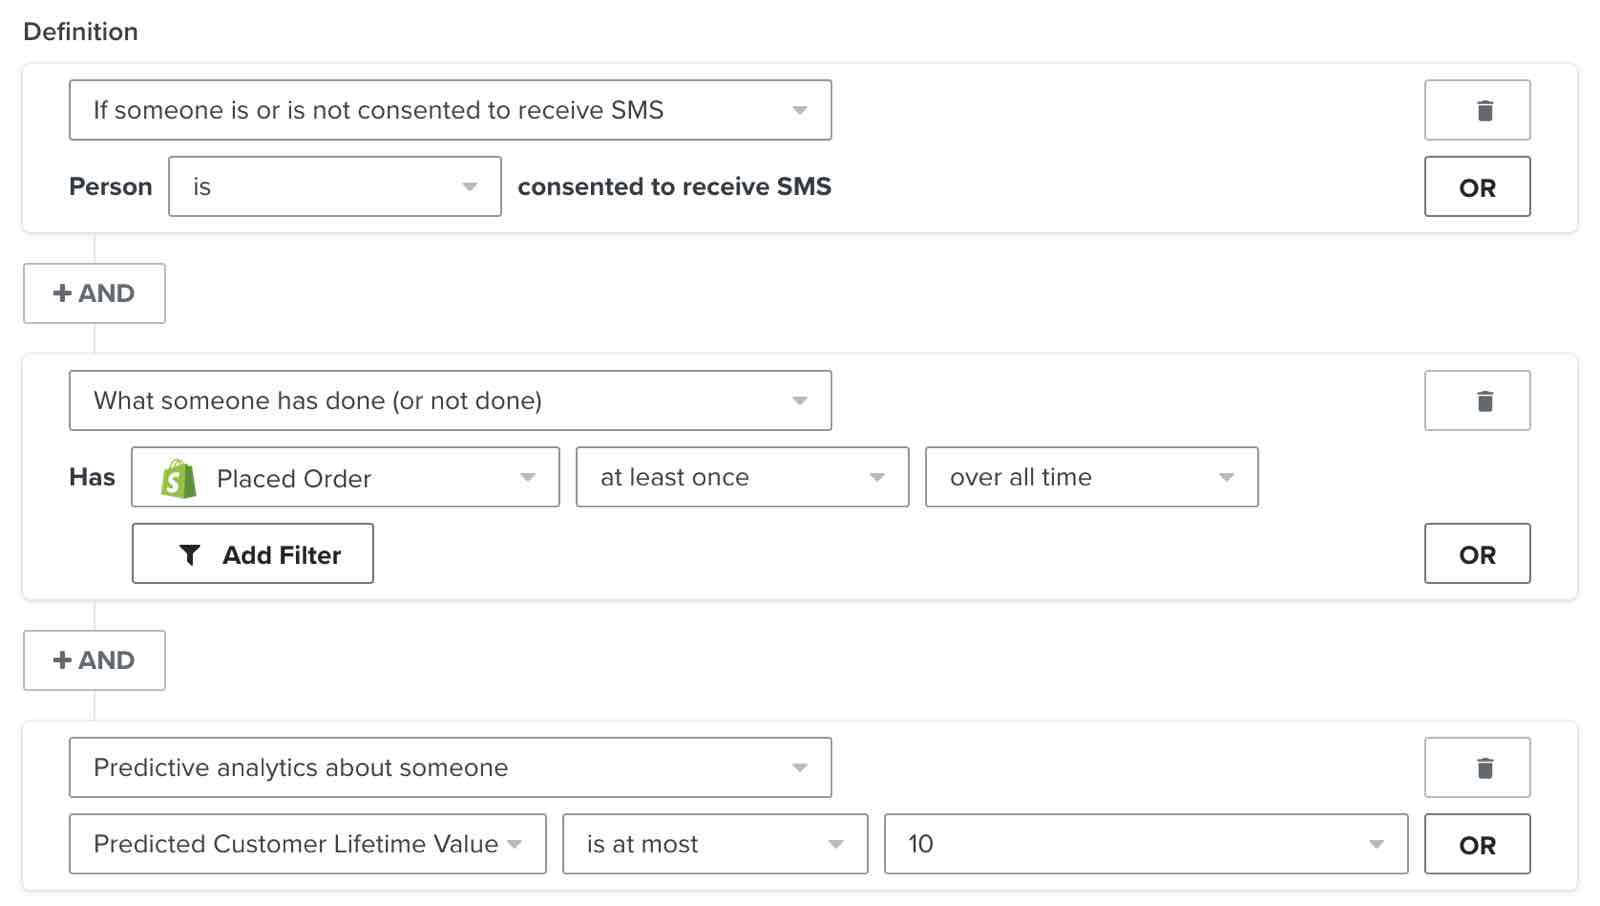 A segment of SMS subscribers with low predicted customer lifetime value